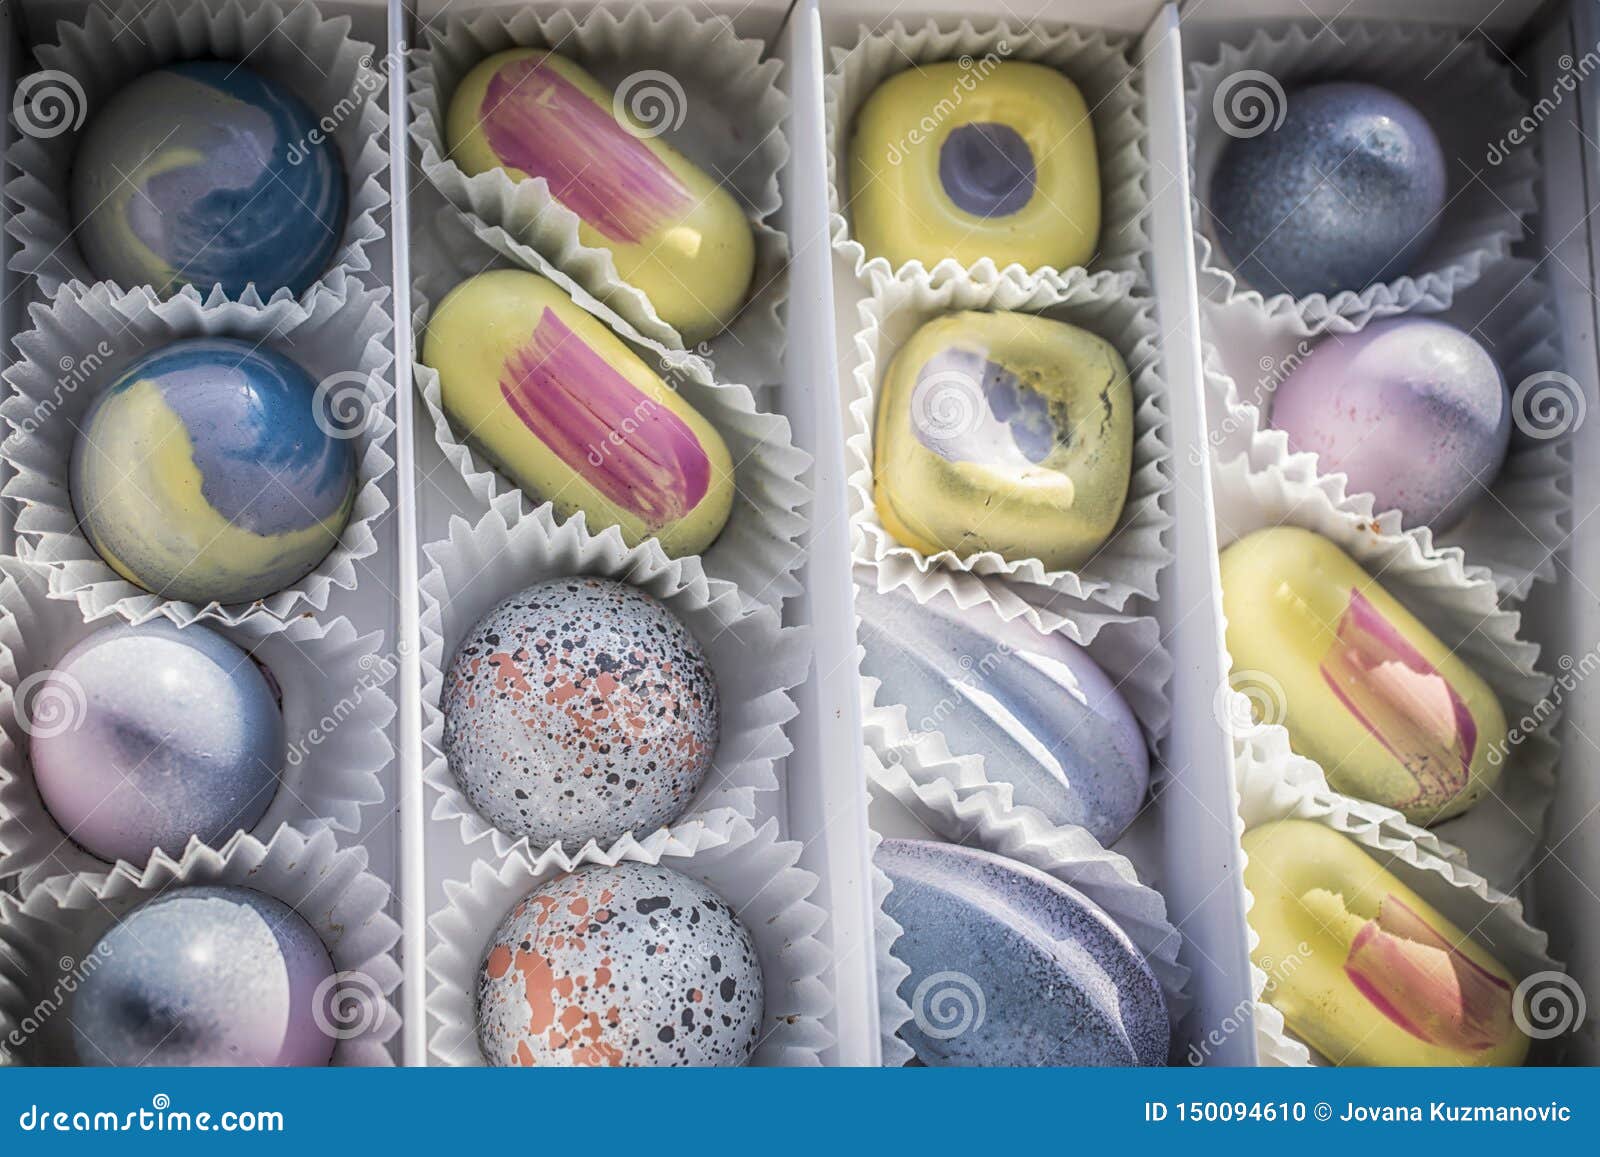 Candies in Pastel Colors stock photo. Image of dessert - 150094610